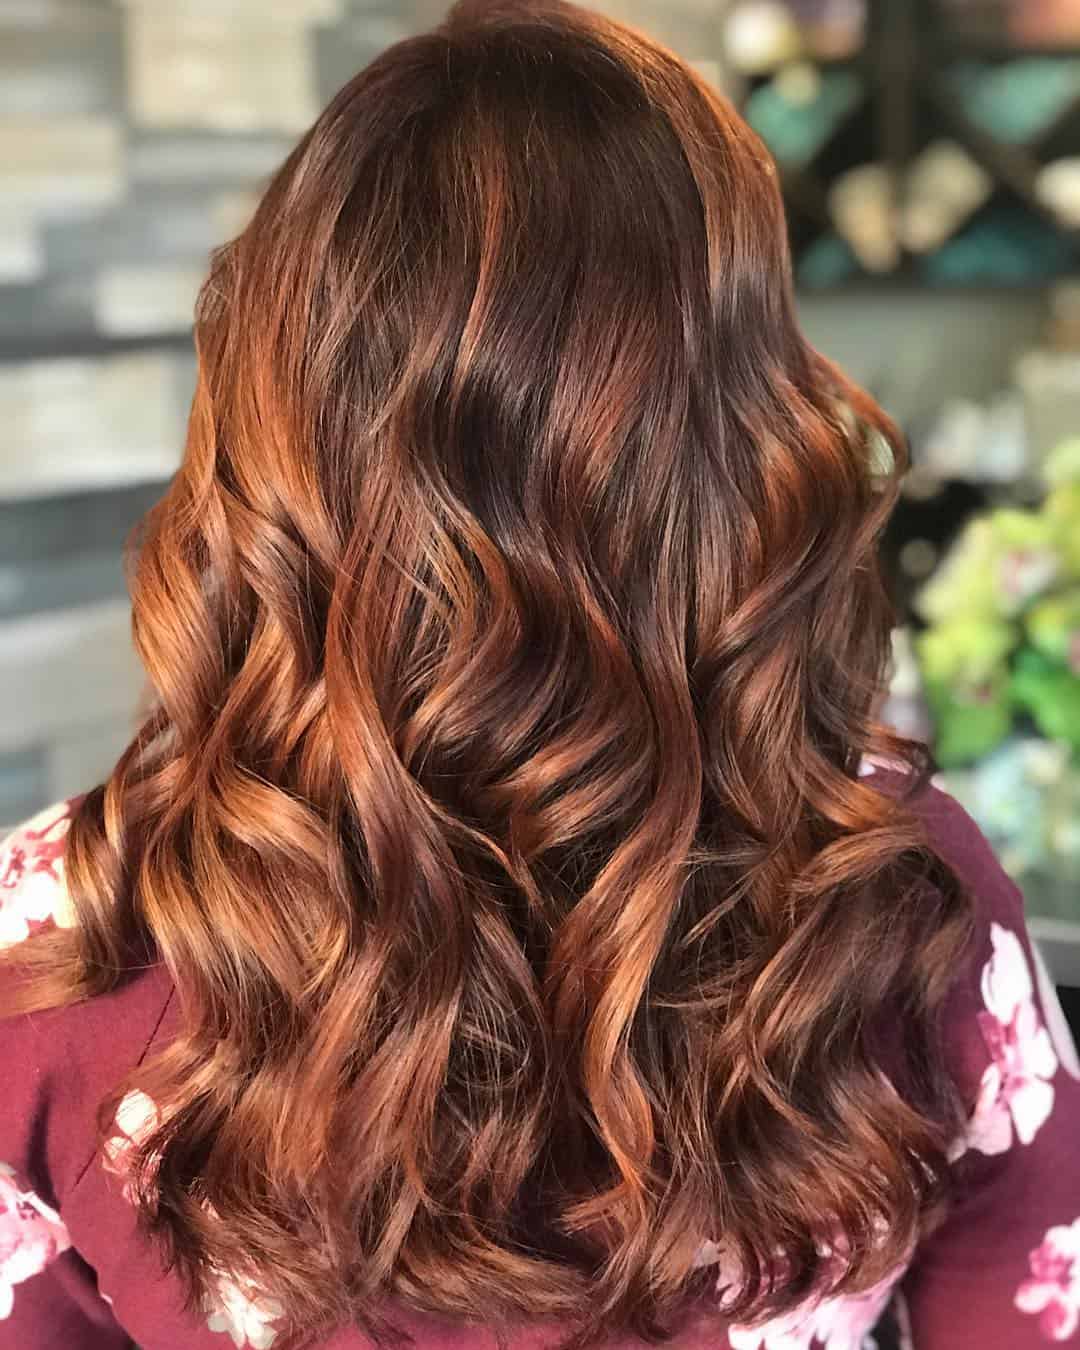 natural medium brown hair with light copper highlights - All About The